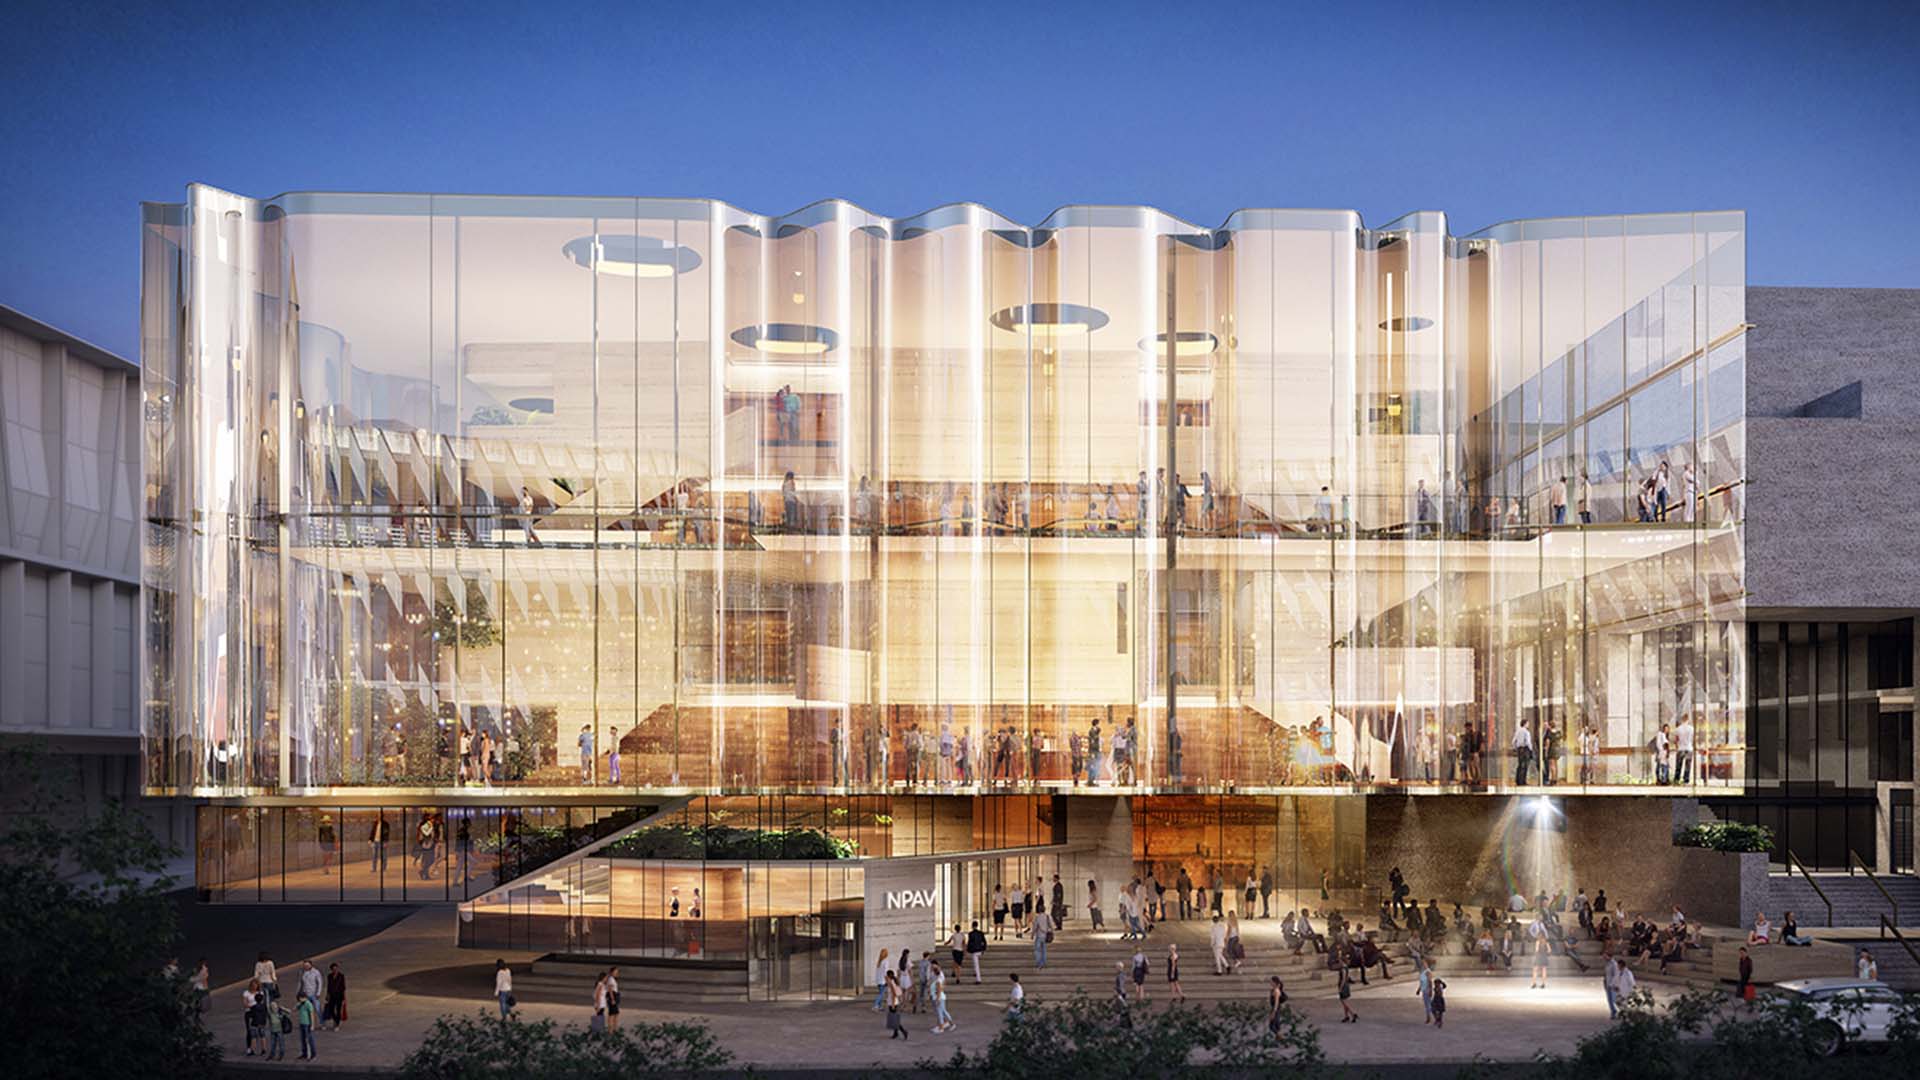 South Bank's Huge New Performing Arts Theatre Will Feature a Major Piece of First Nations Public Art